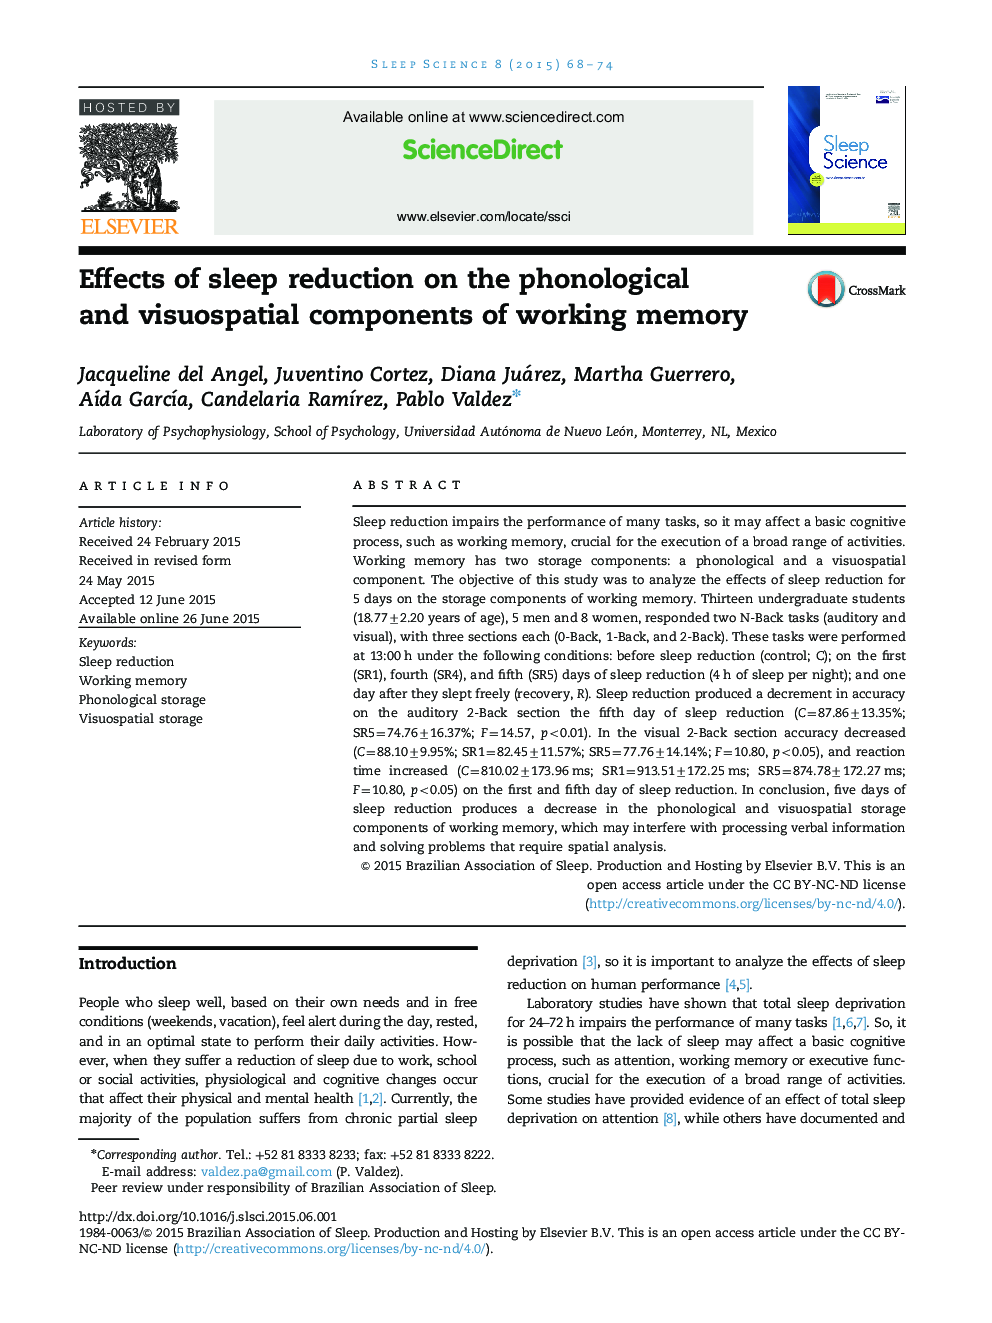 Effects of sleep reduction on the phonological and visuospatial components of working memory 